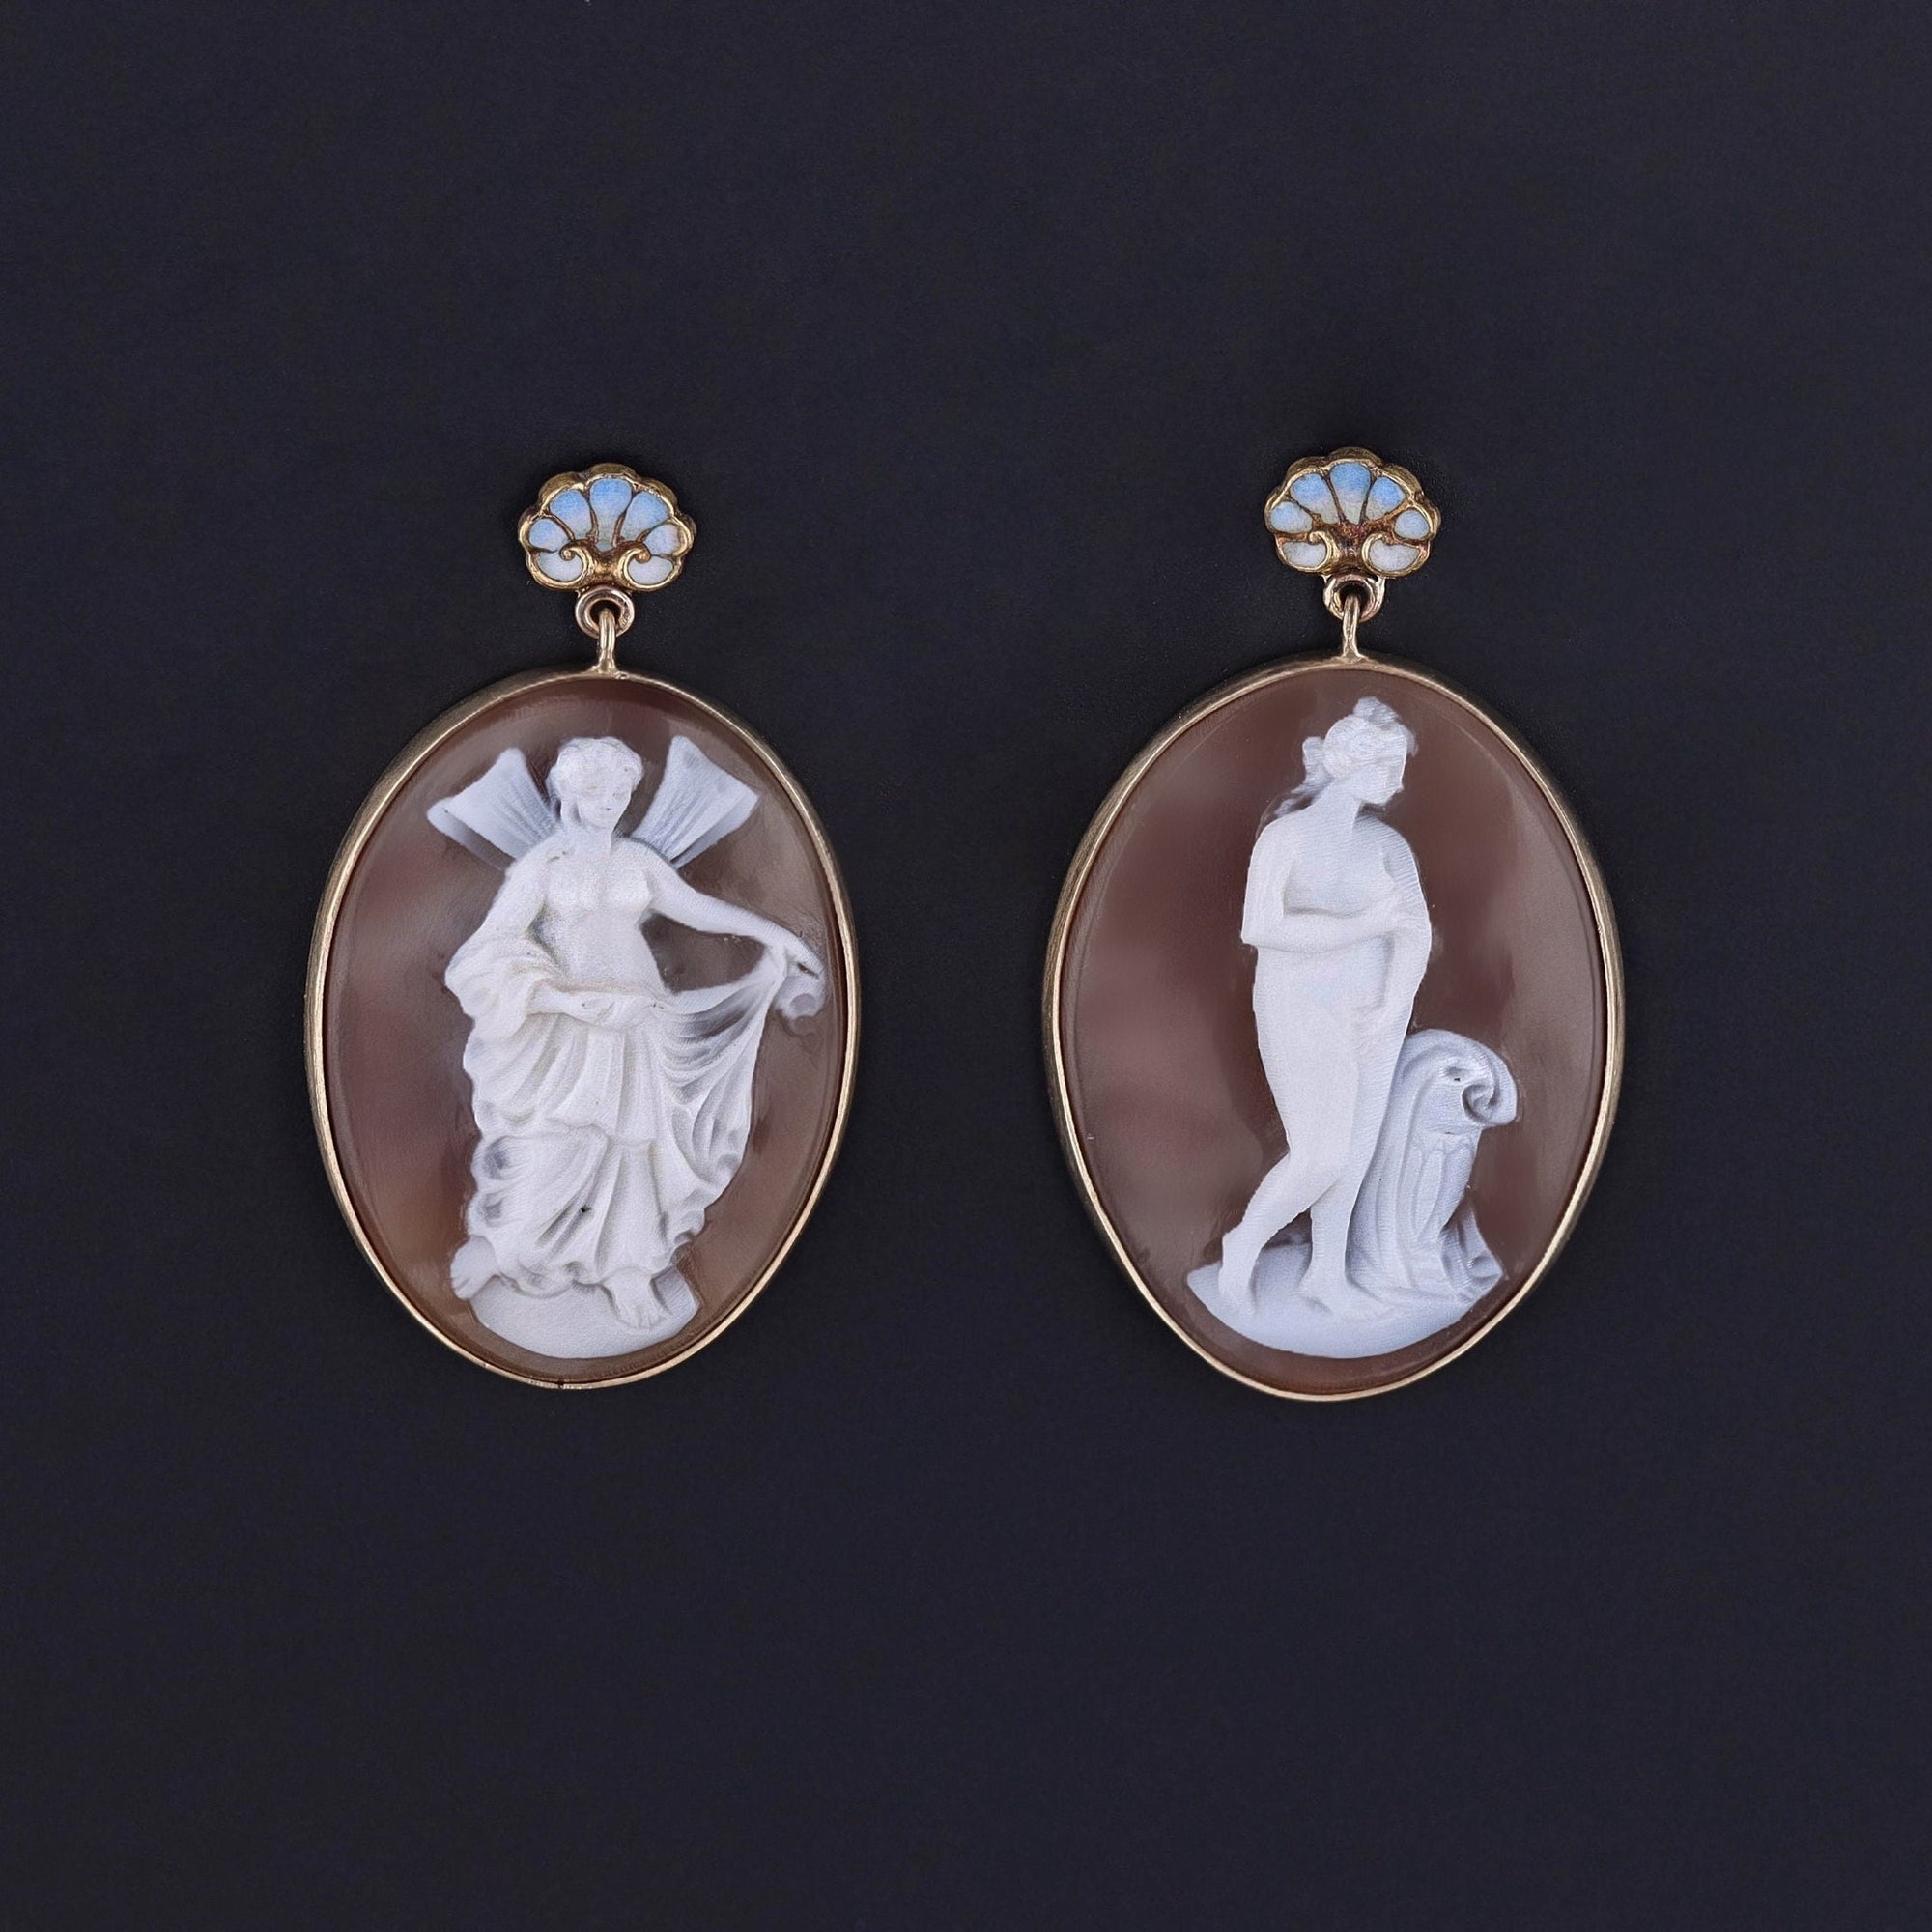 Antique Cameo Conversion Earrings of 14k Gold